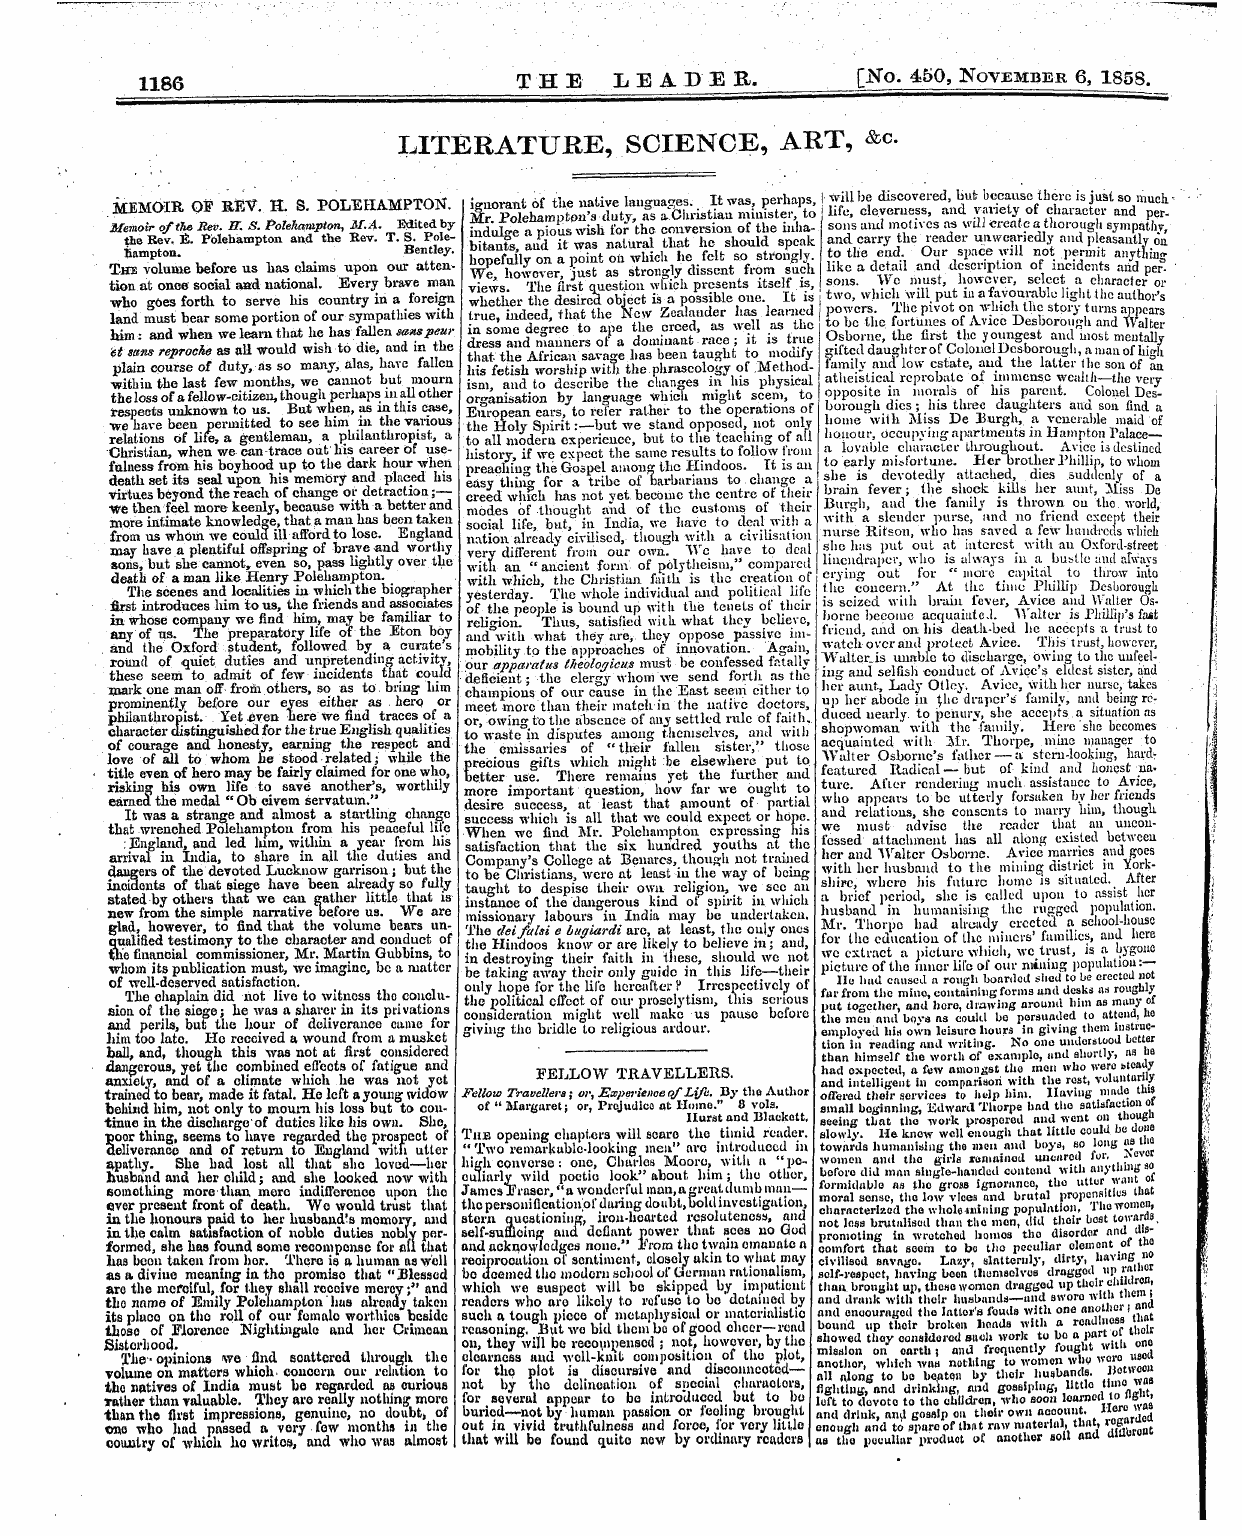 Leader (1850-1860): jS F Y, 1st edition: 10